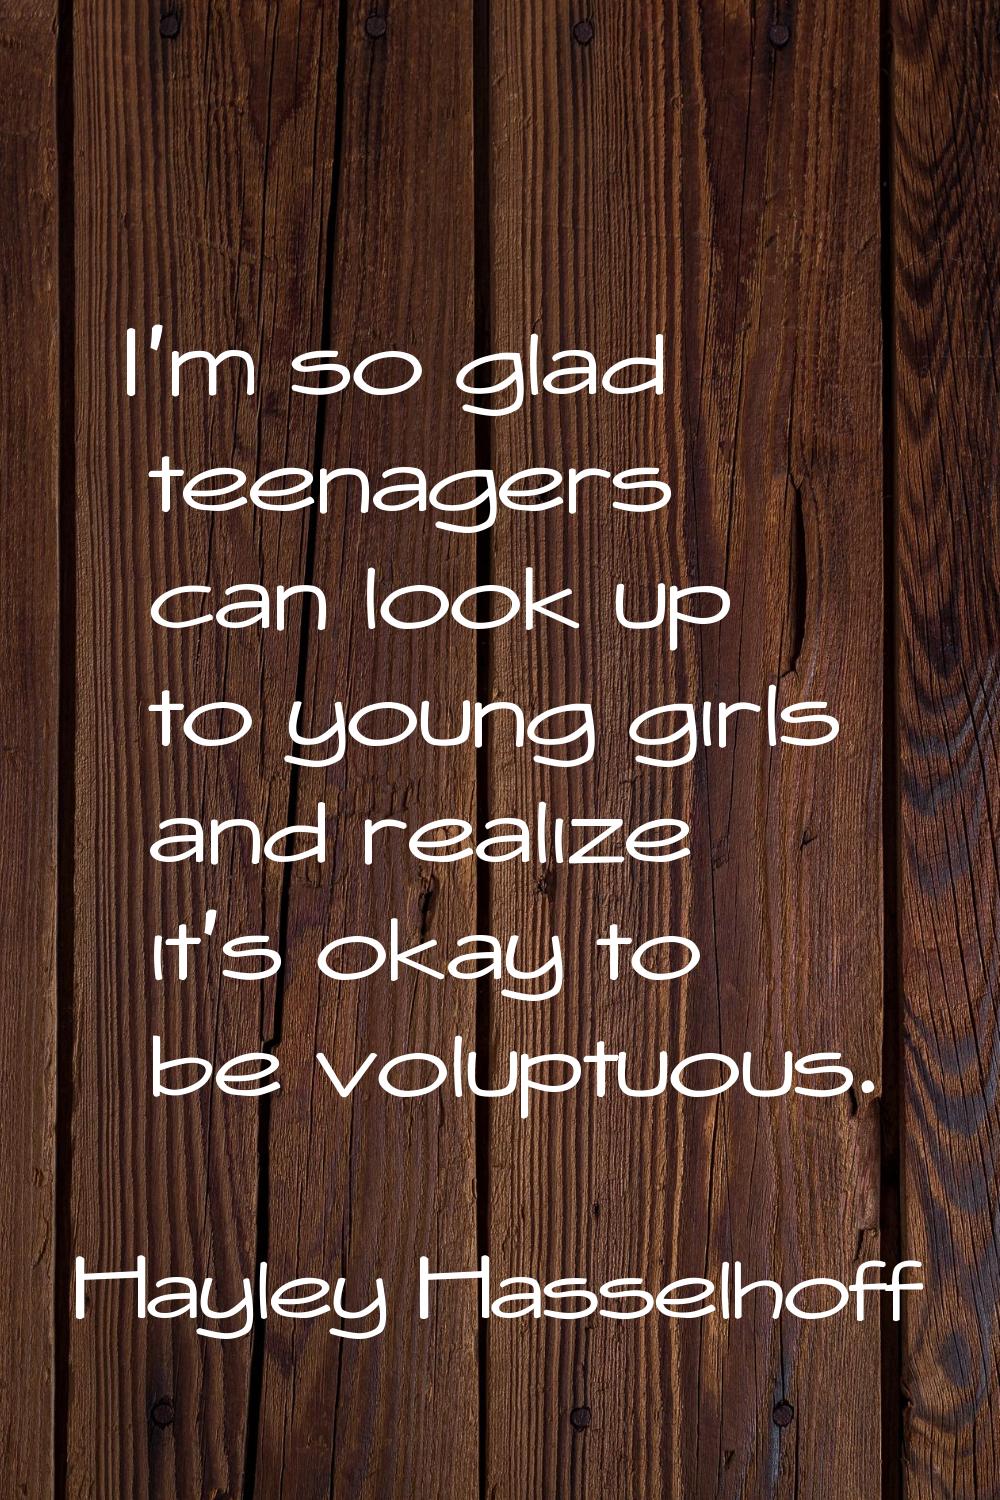 I'm so glad teenagers can look up to young girls and realize it's okay to be voluptuous.